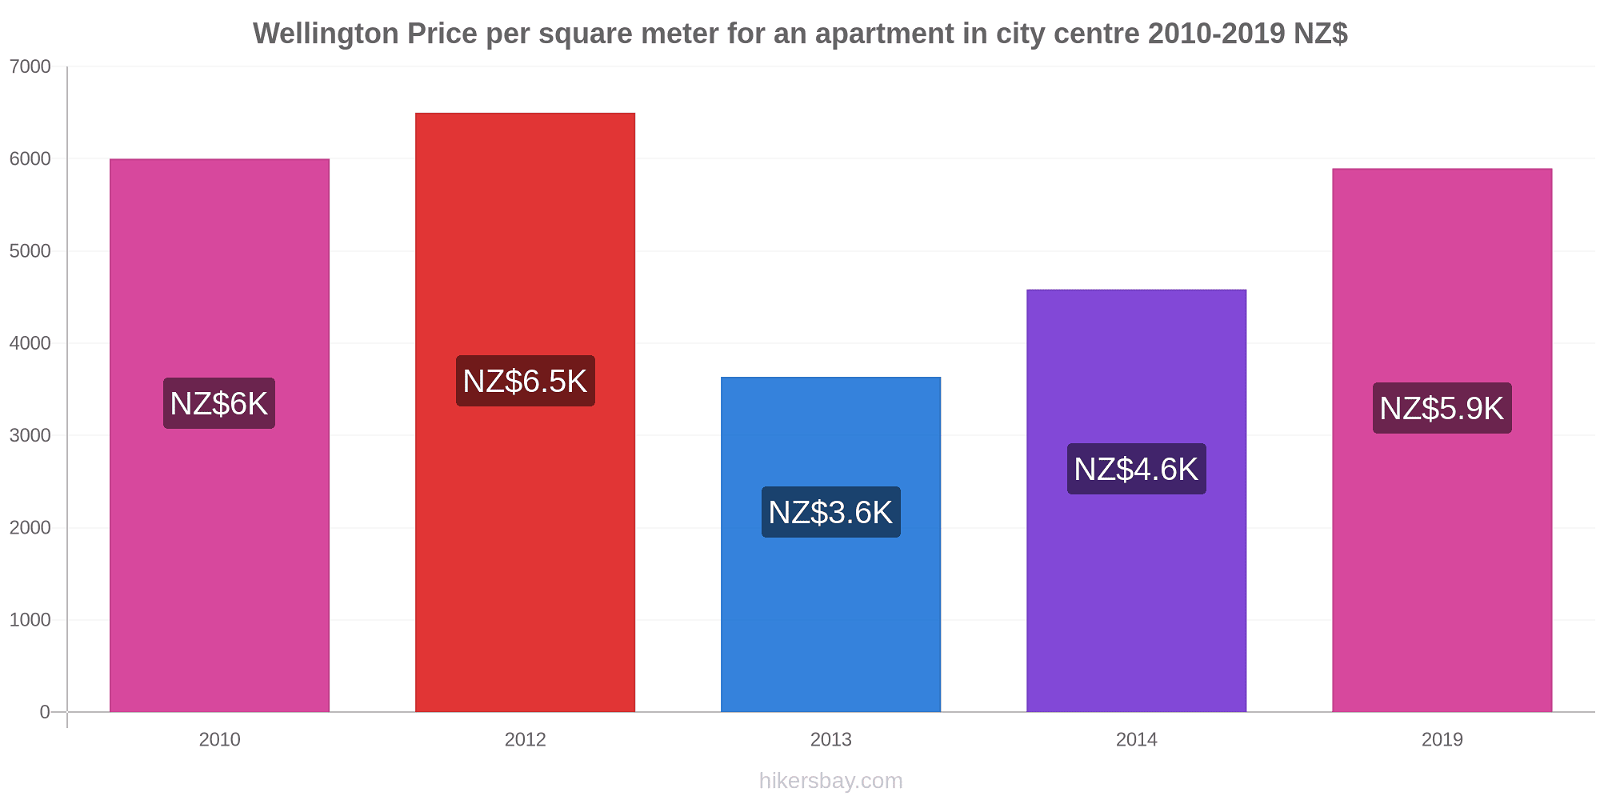 Wellington price changes Price per square meter for an apartment in city centre hikersbay.com